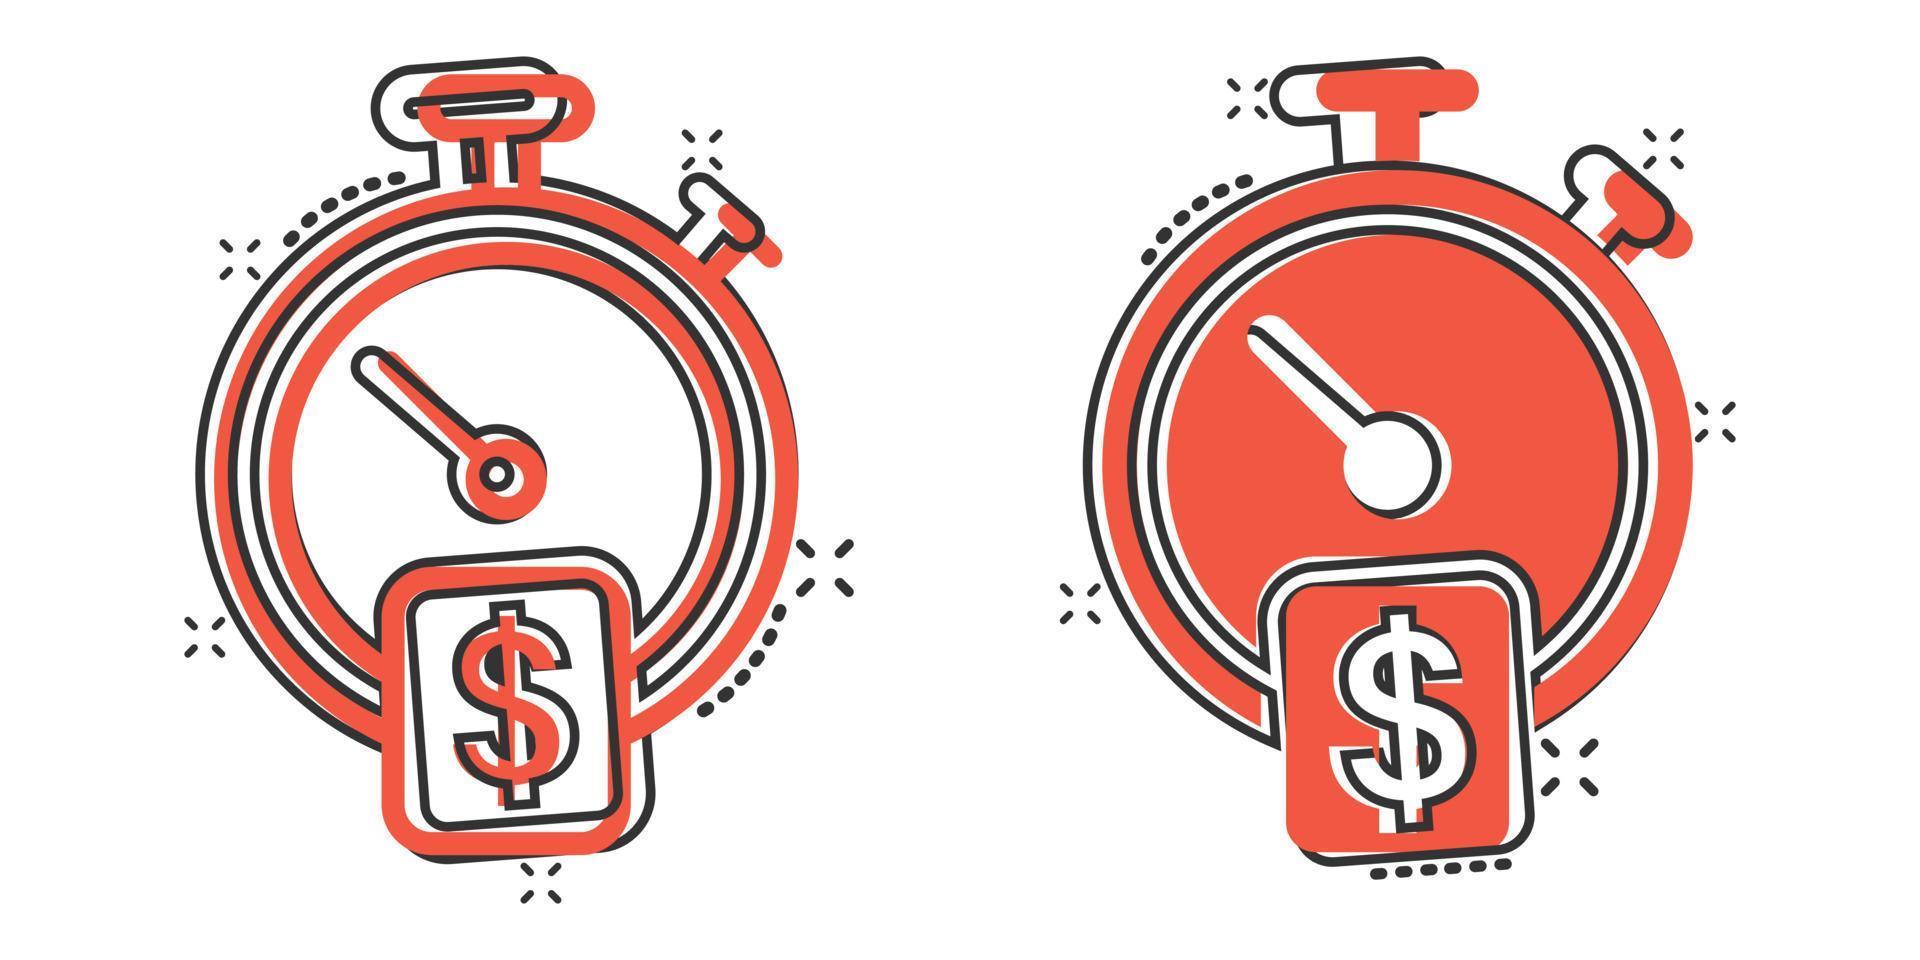 Time is money icon in comic style. Clock with dollar cartoon vector illustration on white isolated background. Currency splash effect business concept.